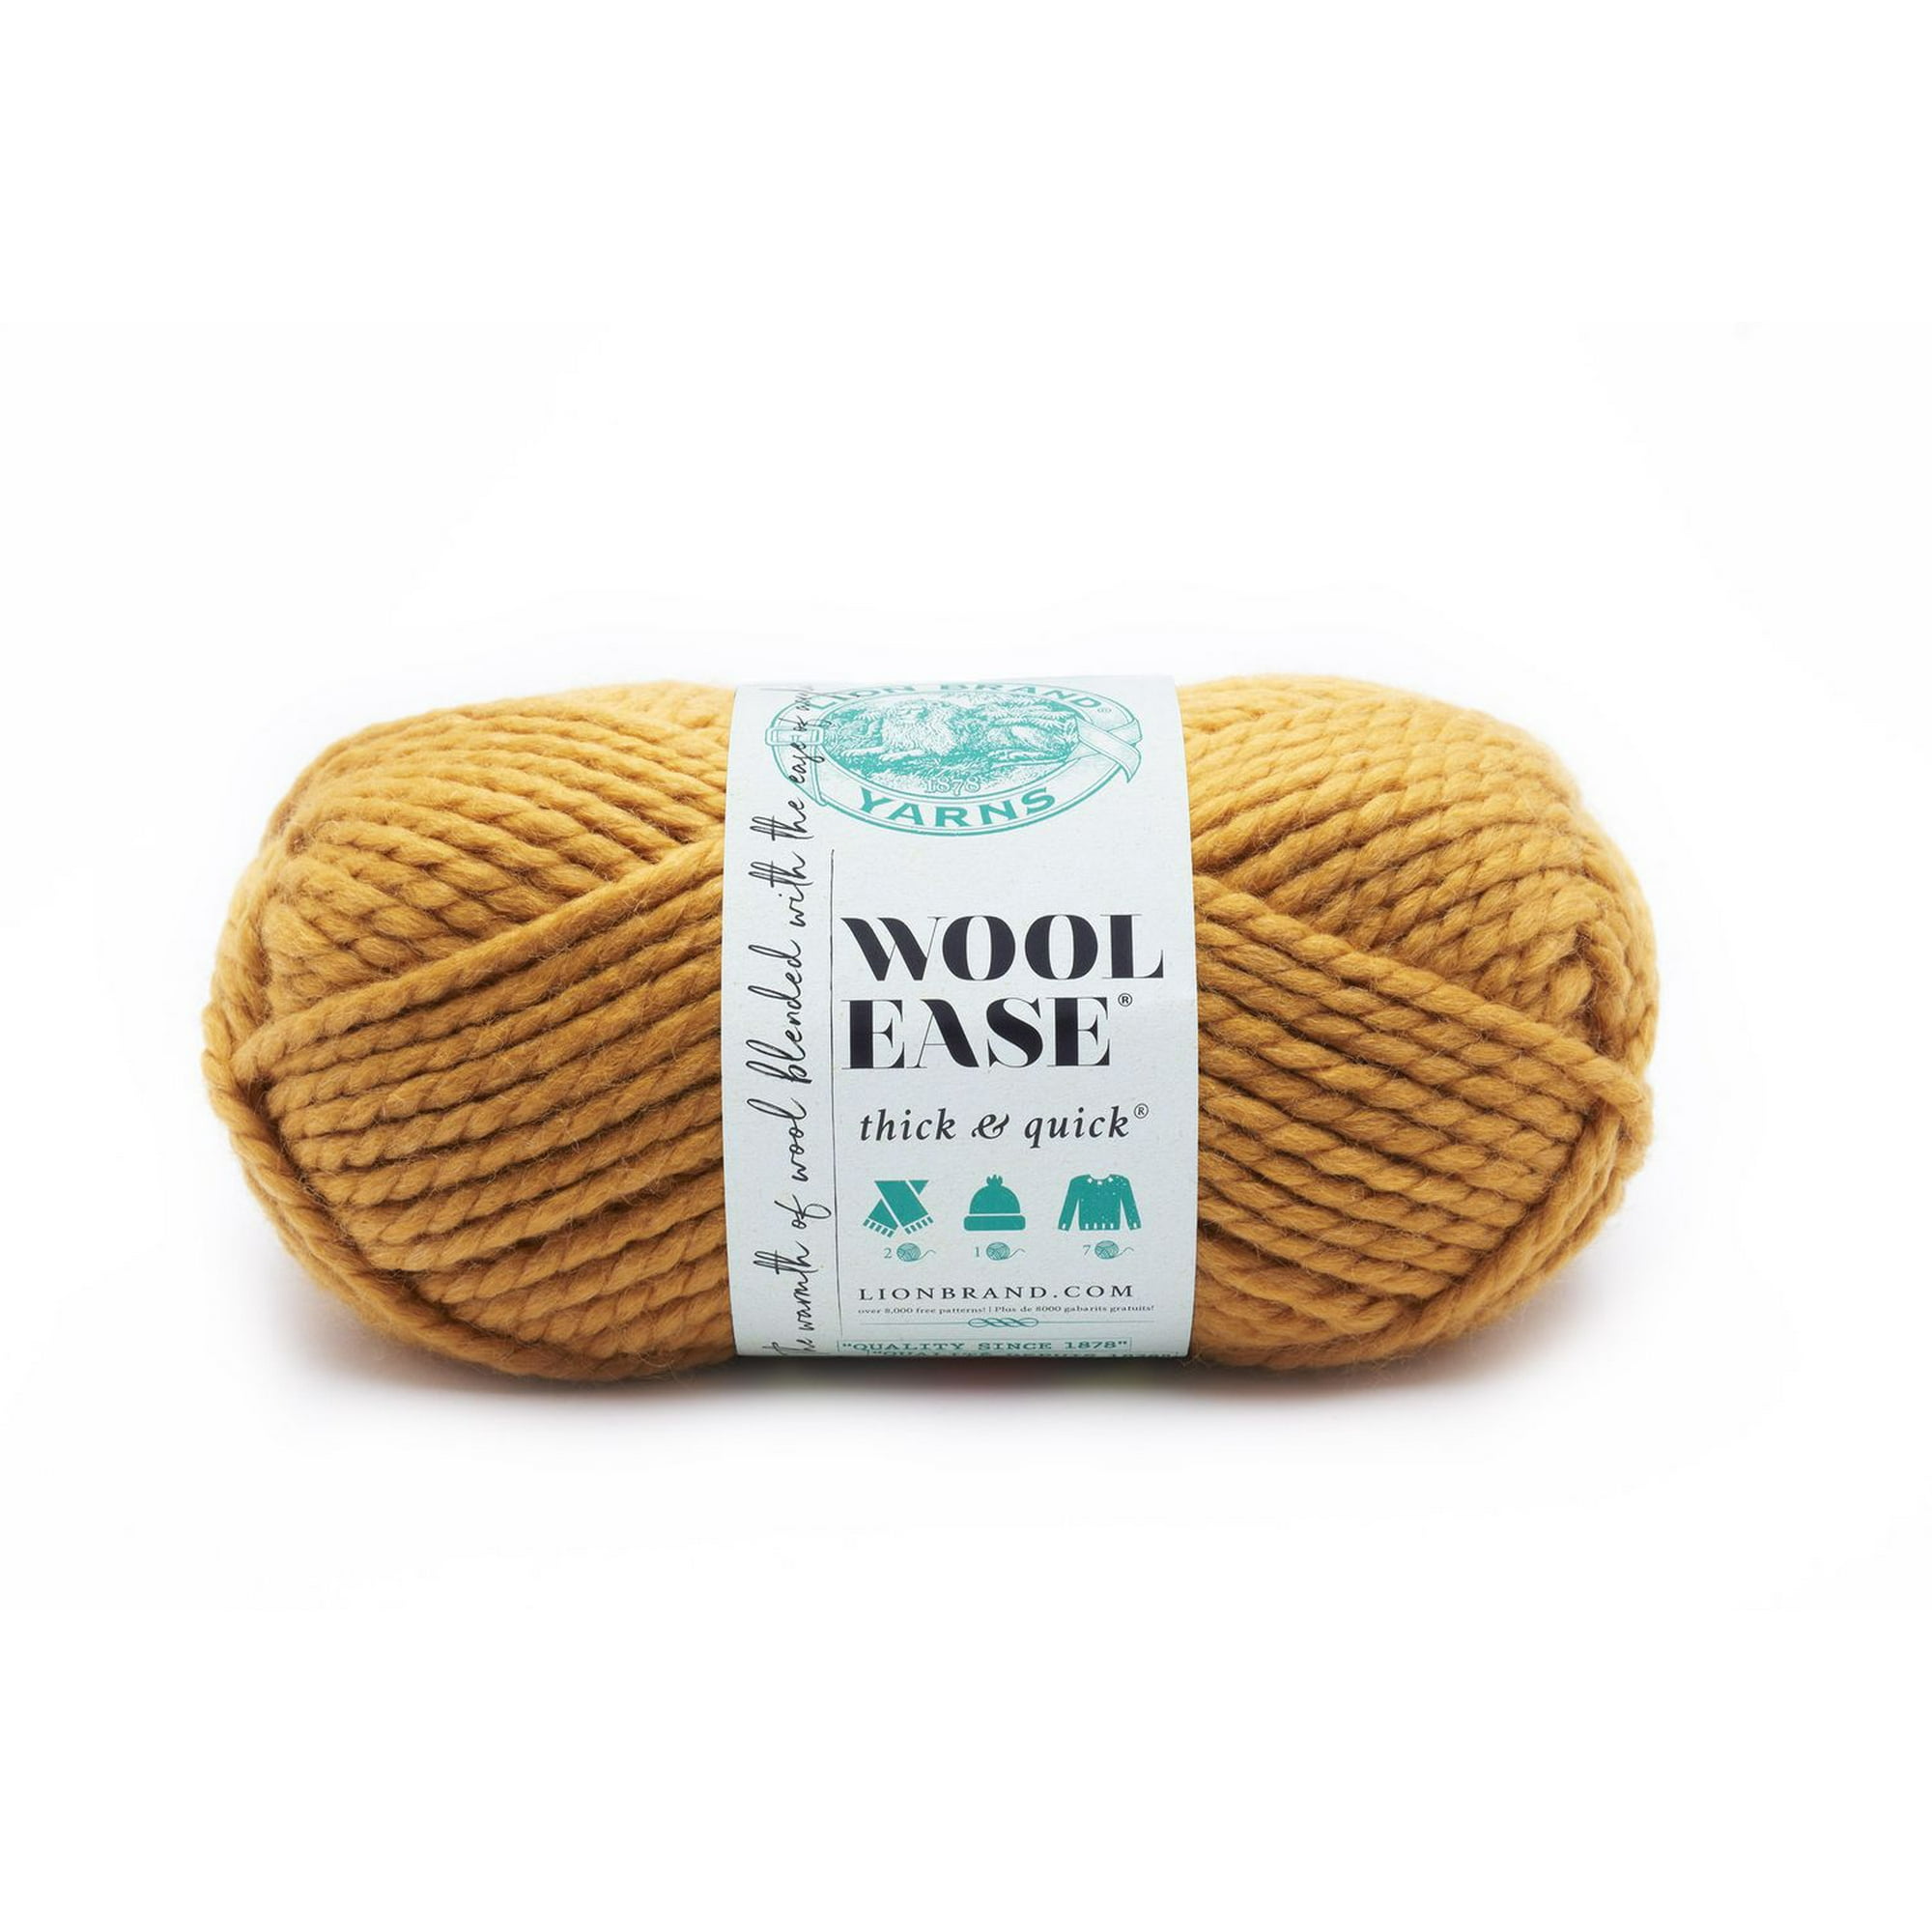 Lion Brand Yarn Woolease Thick & Quick Yarn, 1 Pack, Hydro